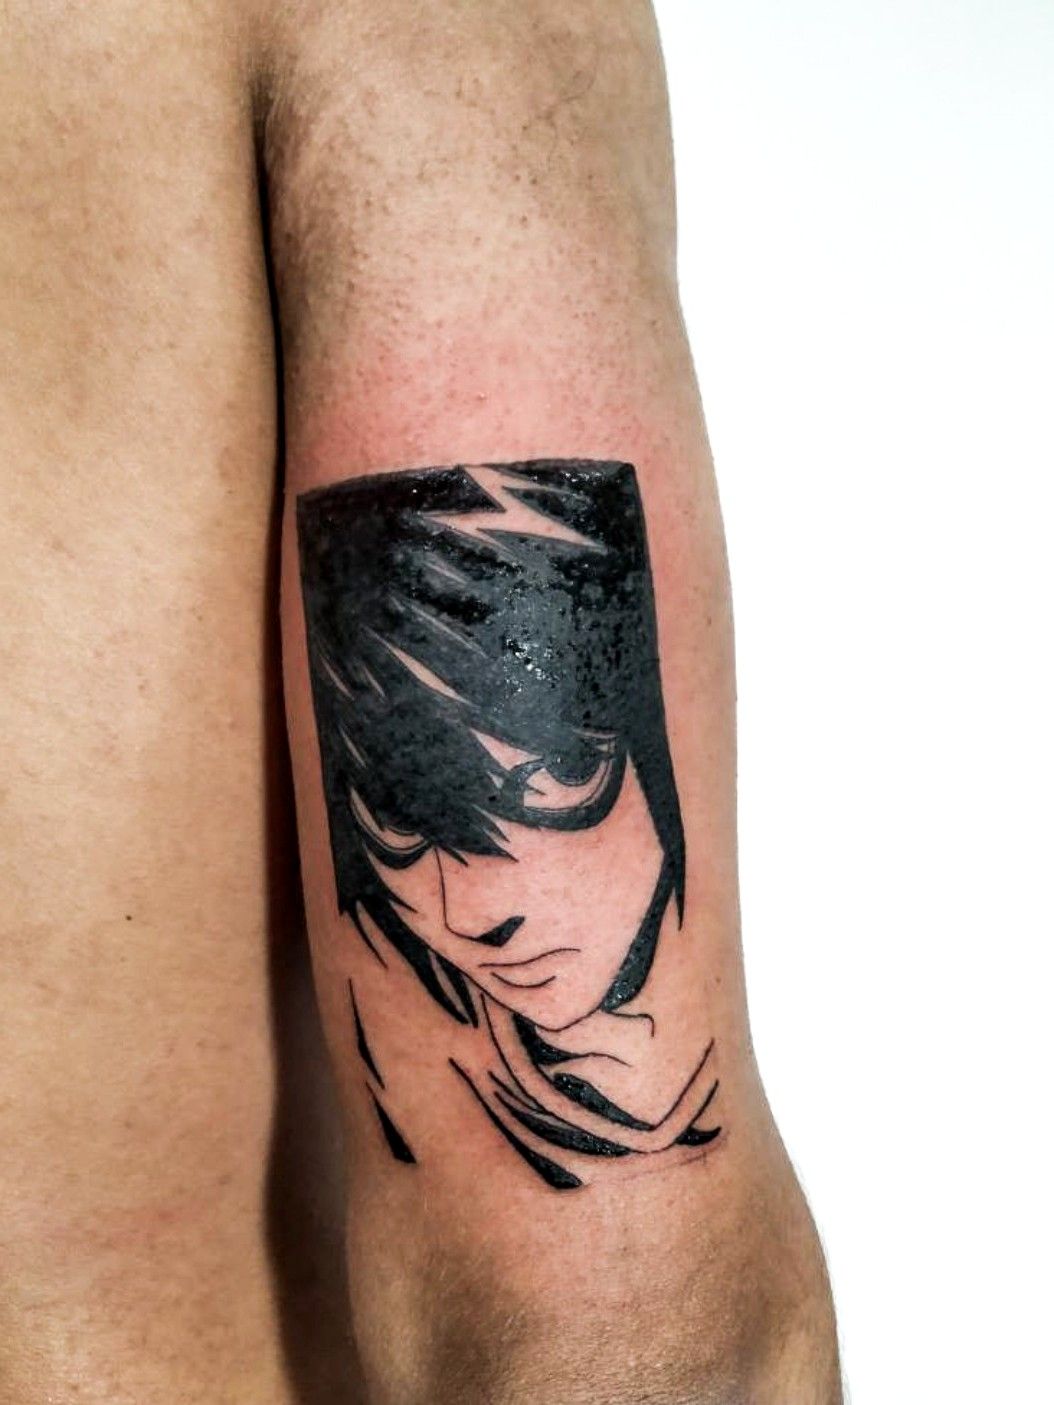 L tattoo from the Death Note Manga that I just had done Done by Mauro at  WildCat Ink  rnerdtattoos